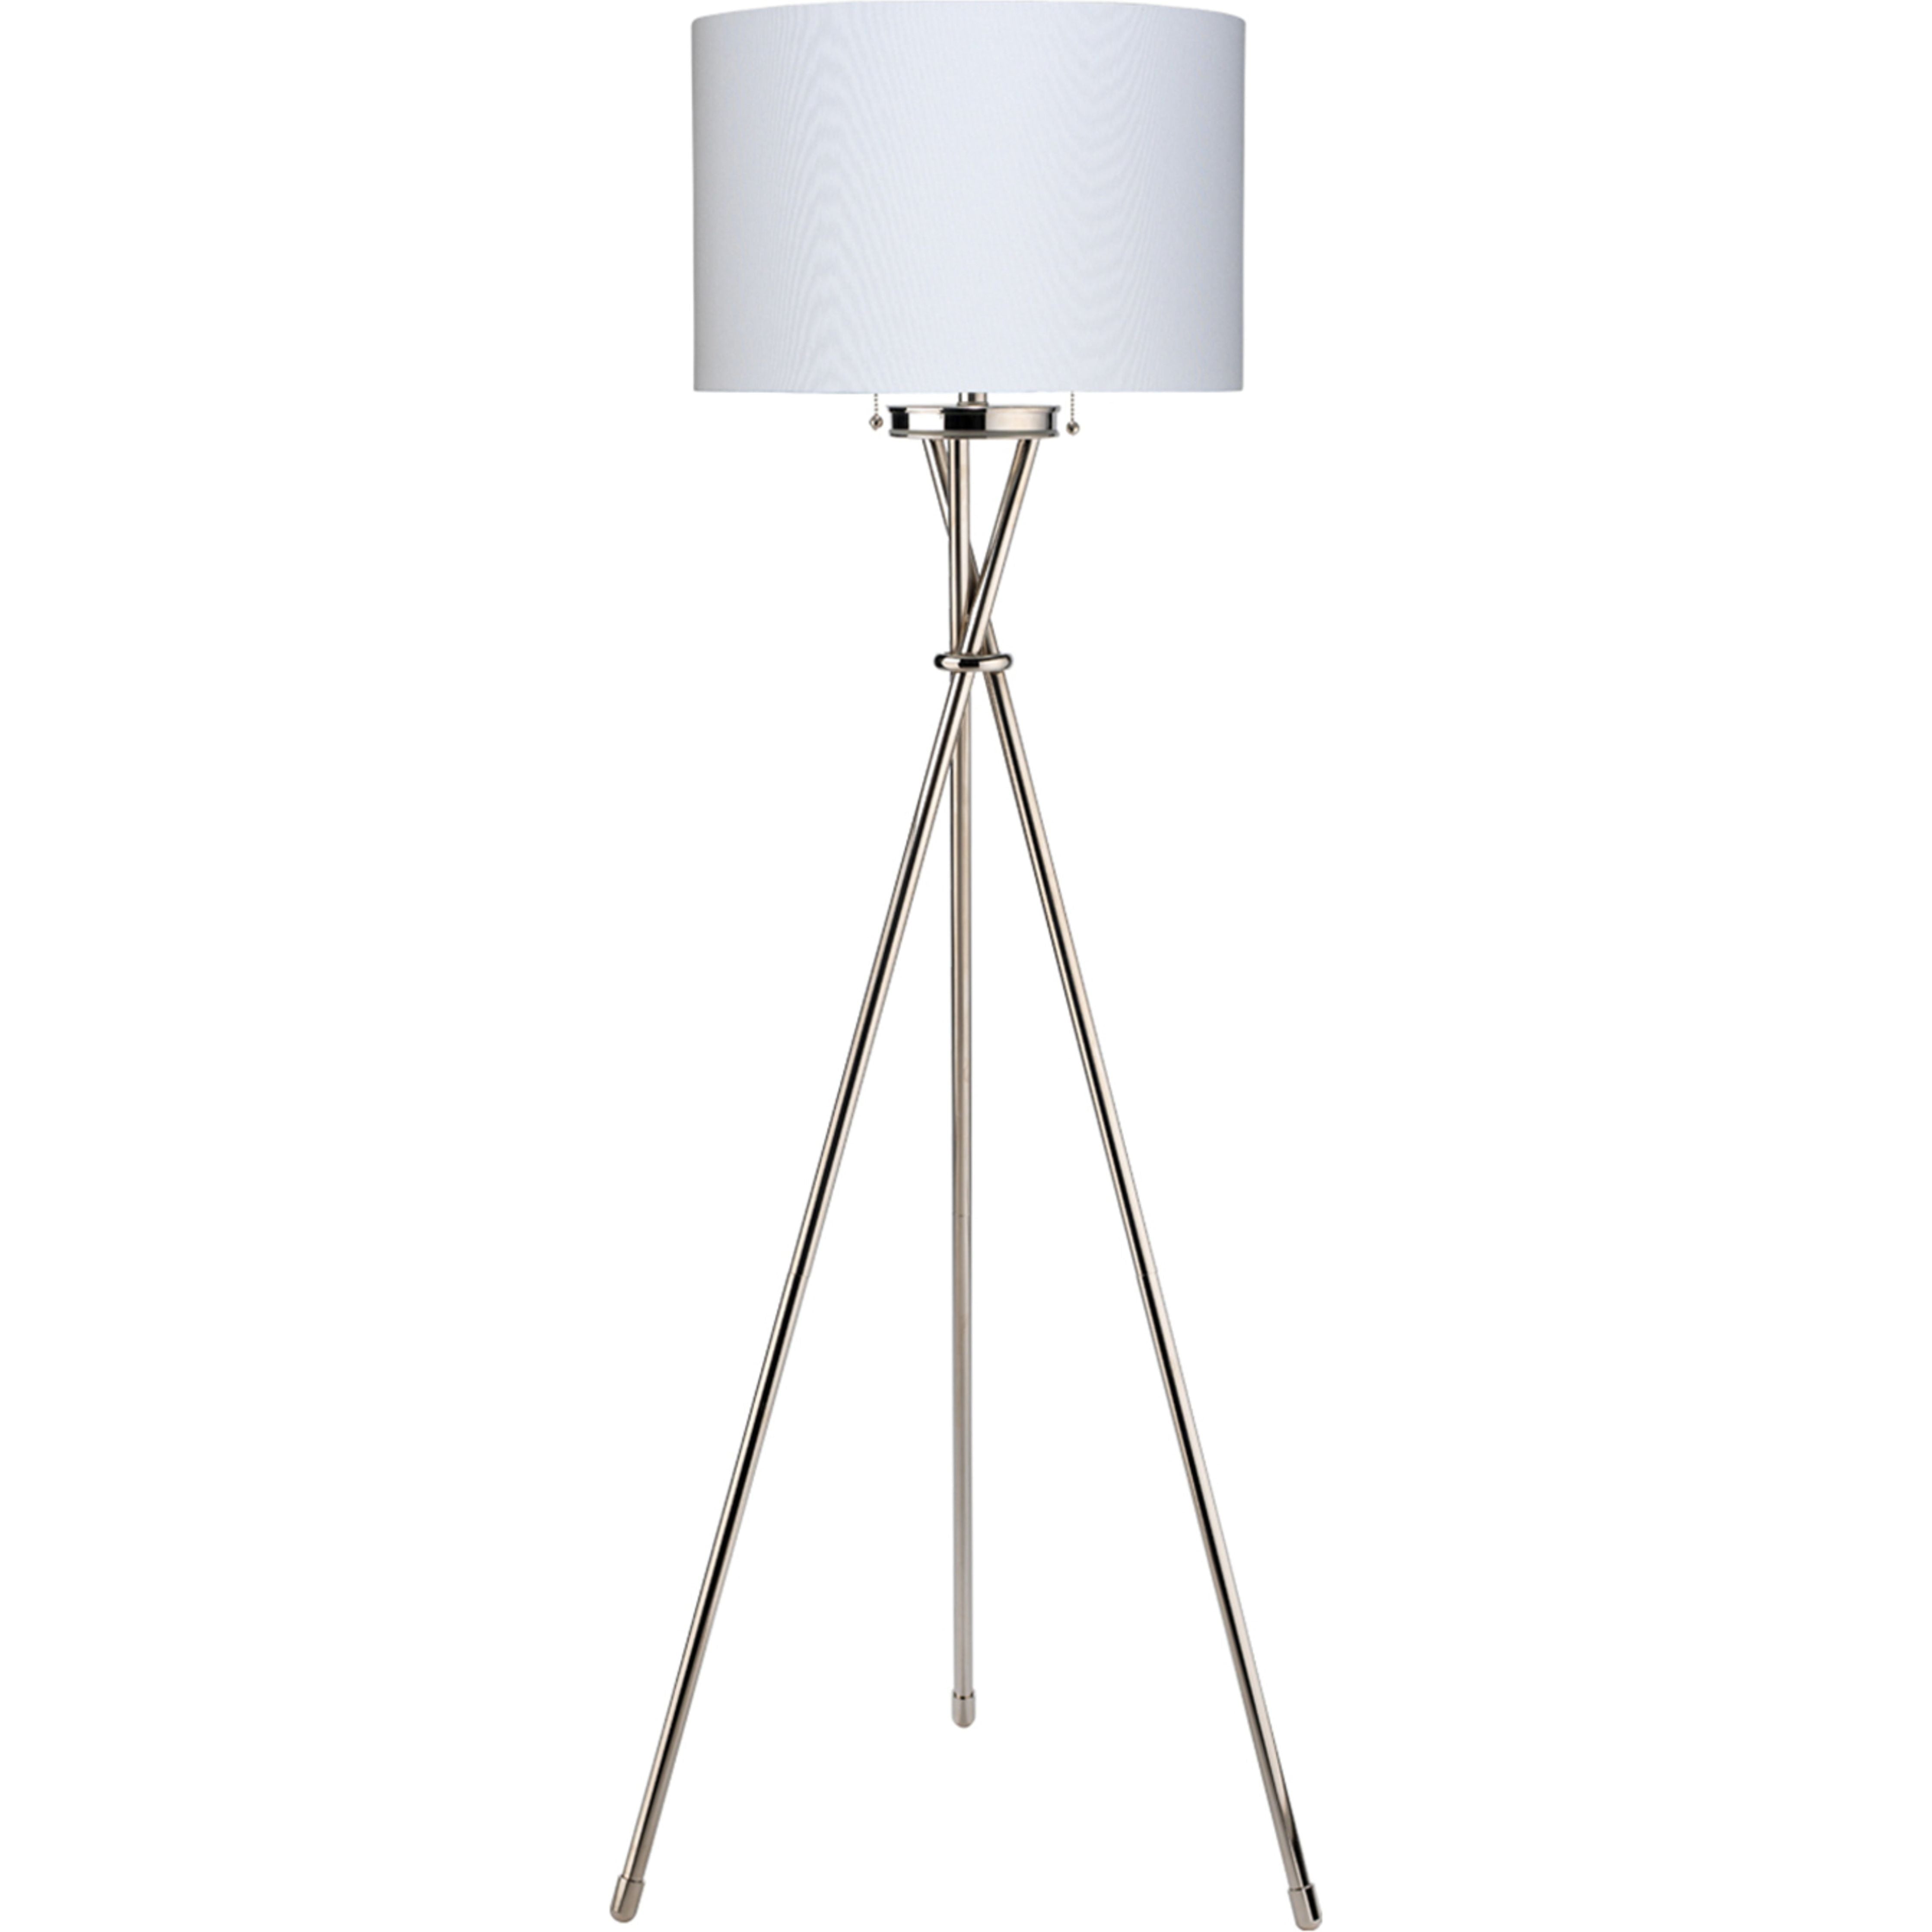 Jamie Young Company - LSMANNYNI - Manny Floor Lamp - Manny - Nickel